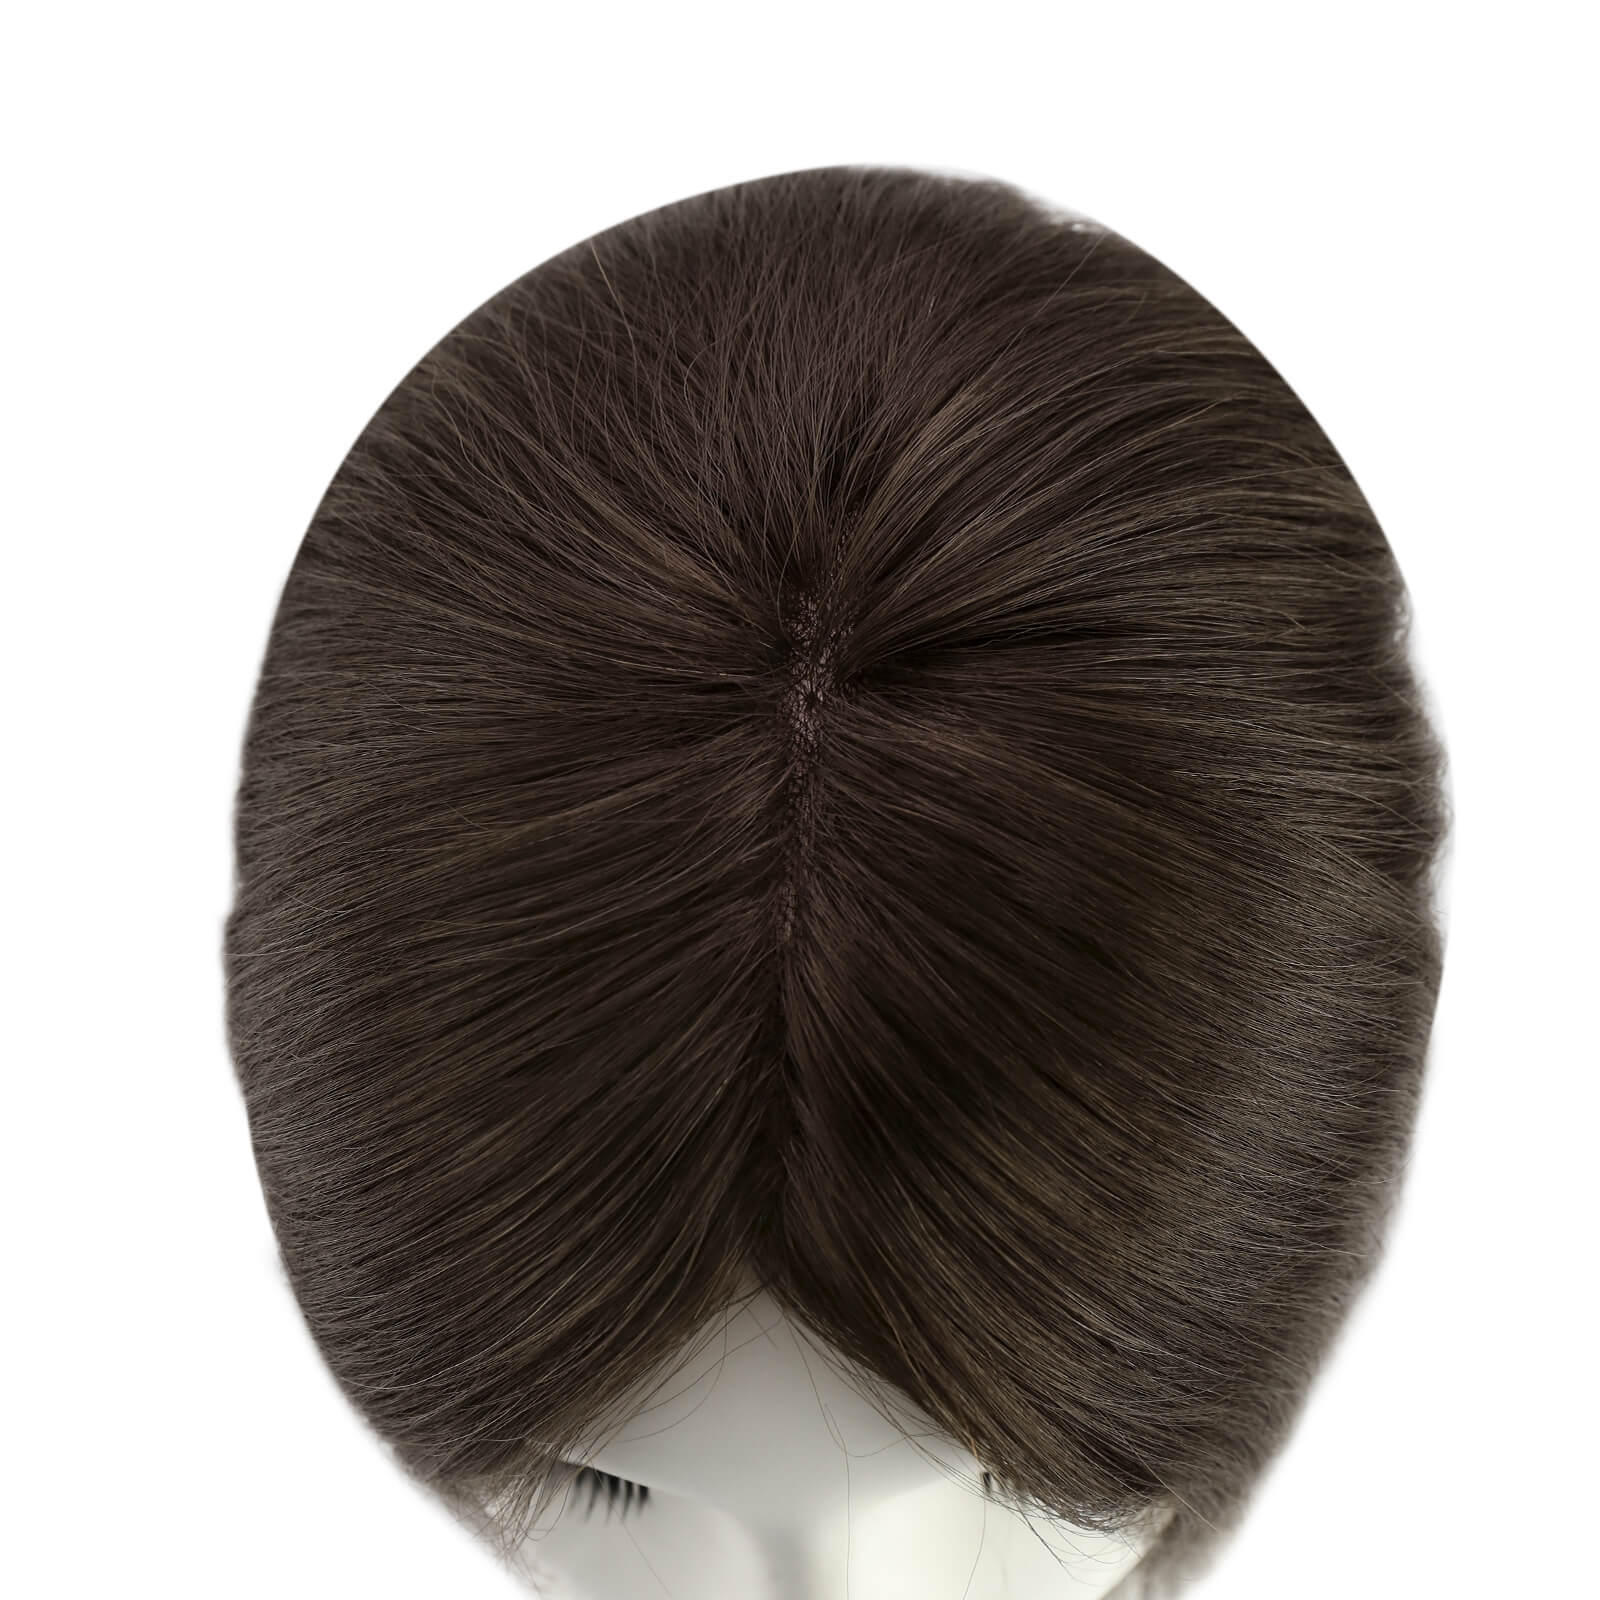 human hair topper,high quality virgin hair extensions,hair topper,women hair topper,wig,hair topper silk base,hair topper human hair,hair extensions,clip in hair extensions,human hair extensions,extensions hair,best hair extensions,brown hair topper,dark brown hair topper,distribute seams at will,invisible topper,large base topper,large base 6*7 inch